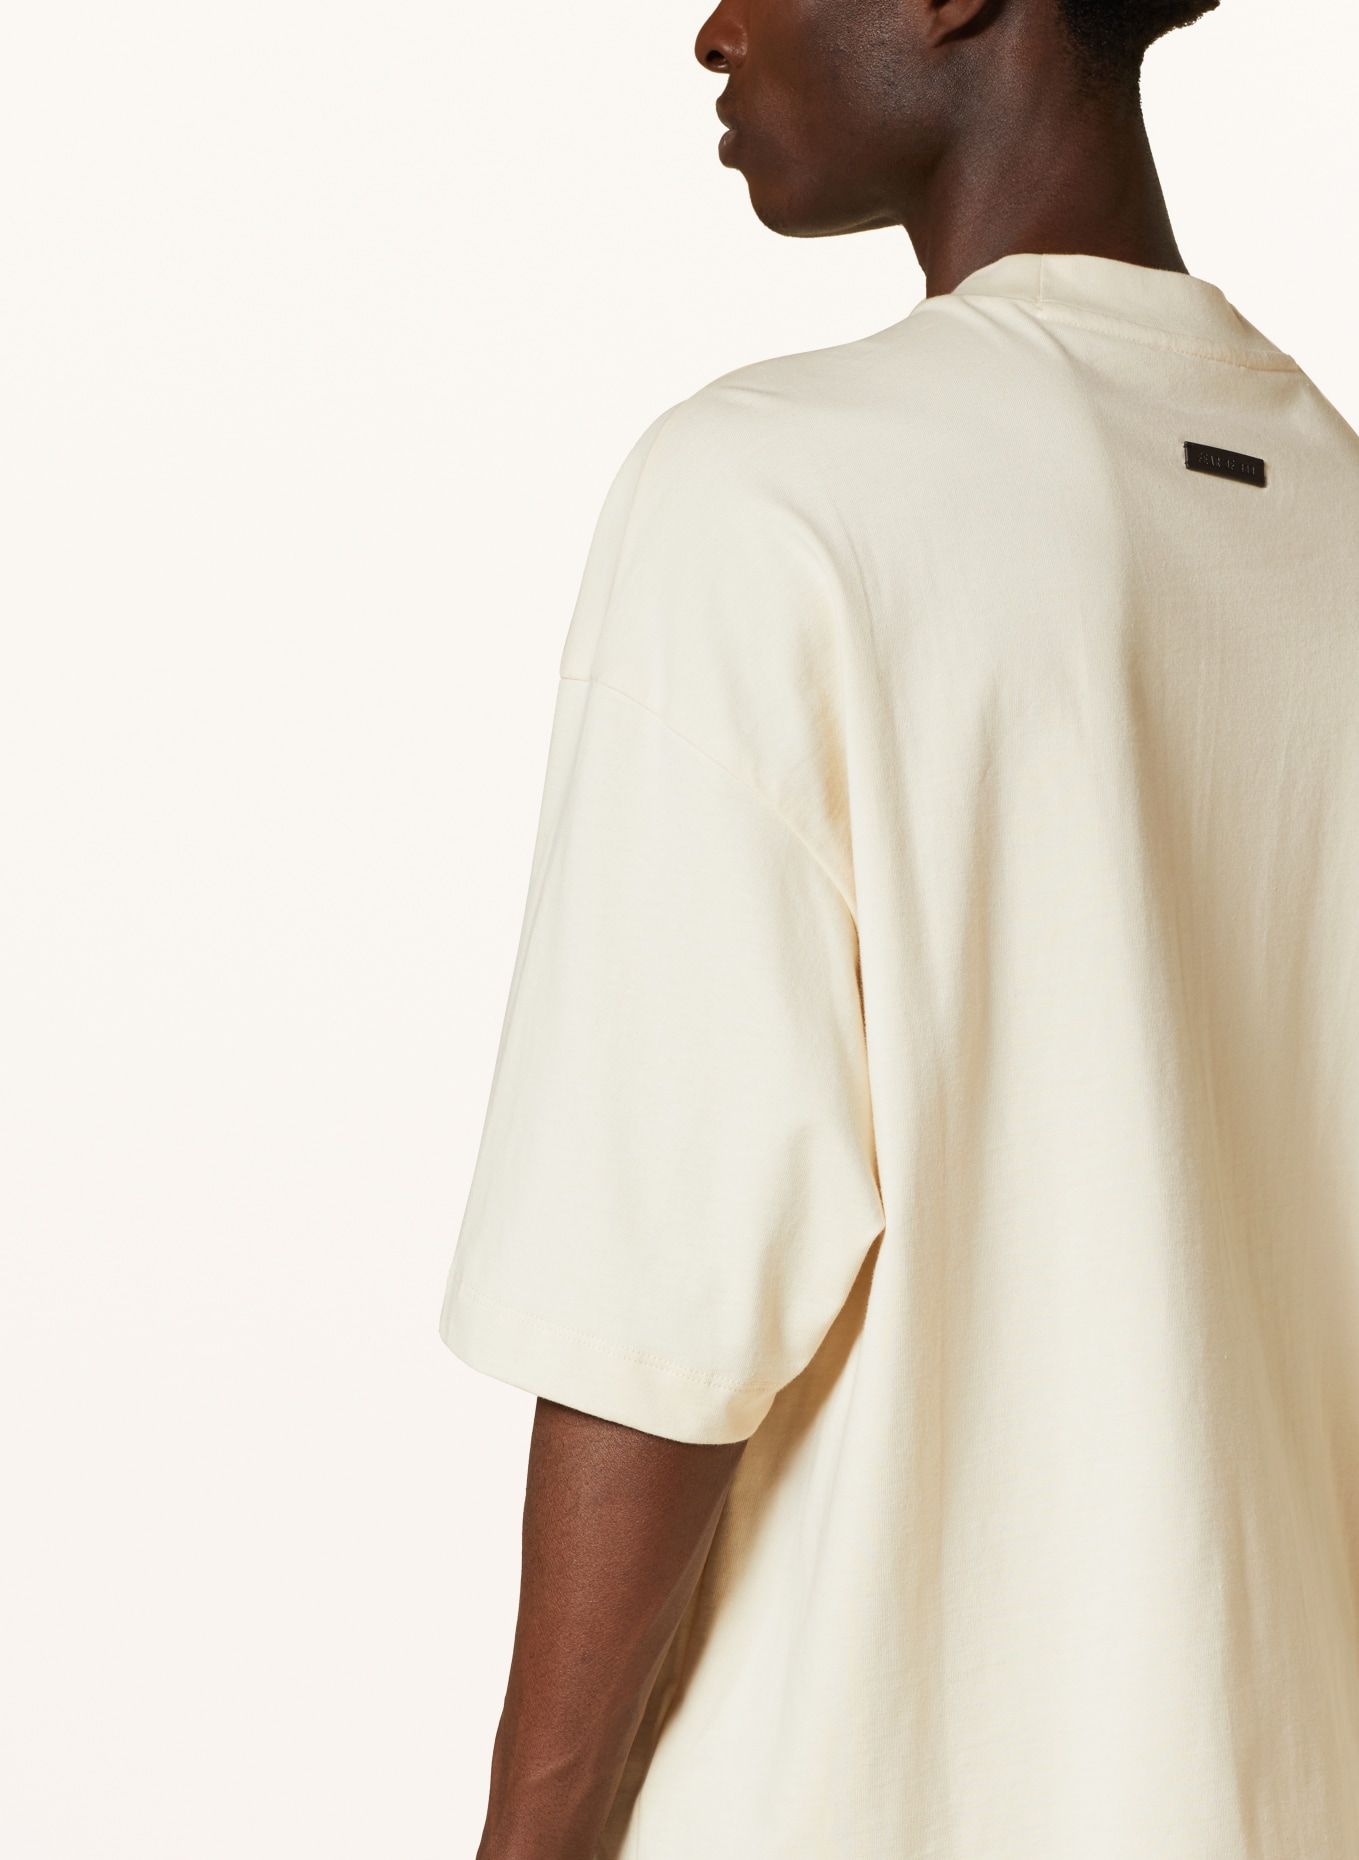 FEAR OF GOD T-shirt, Color: CREAM (Image 4)